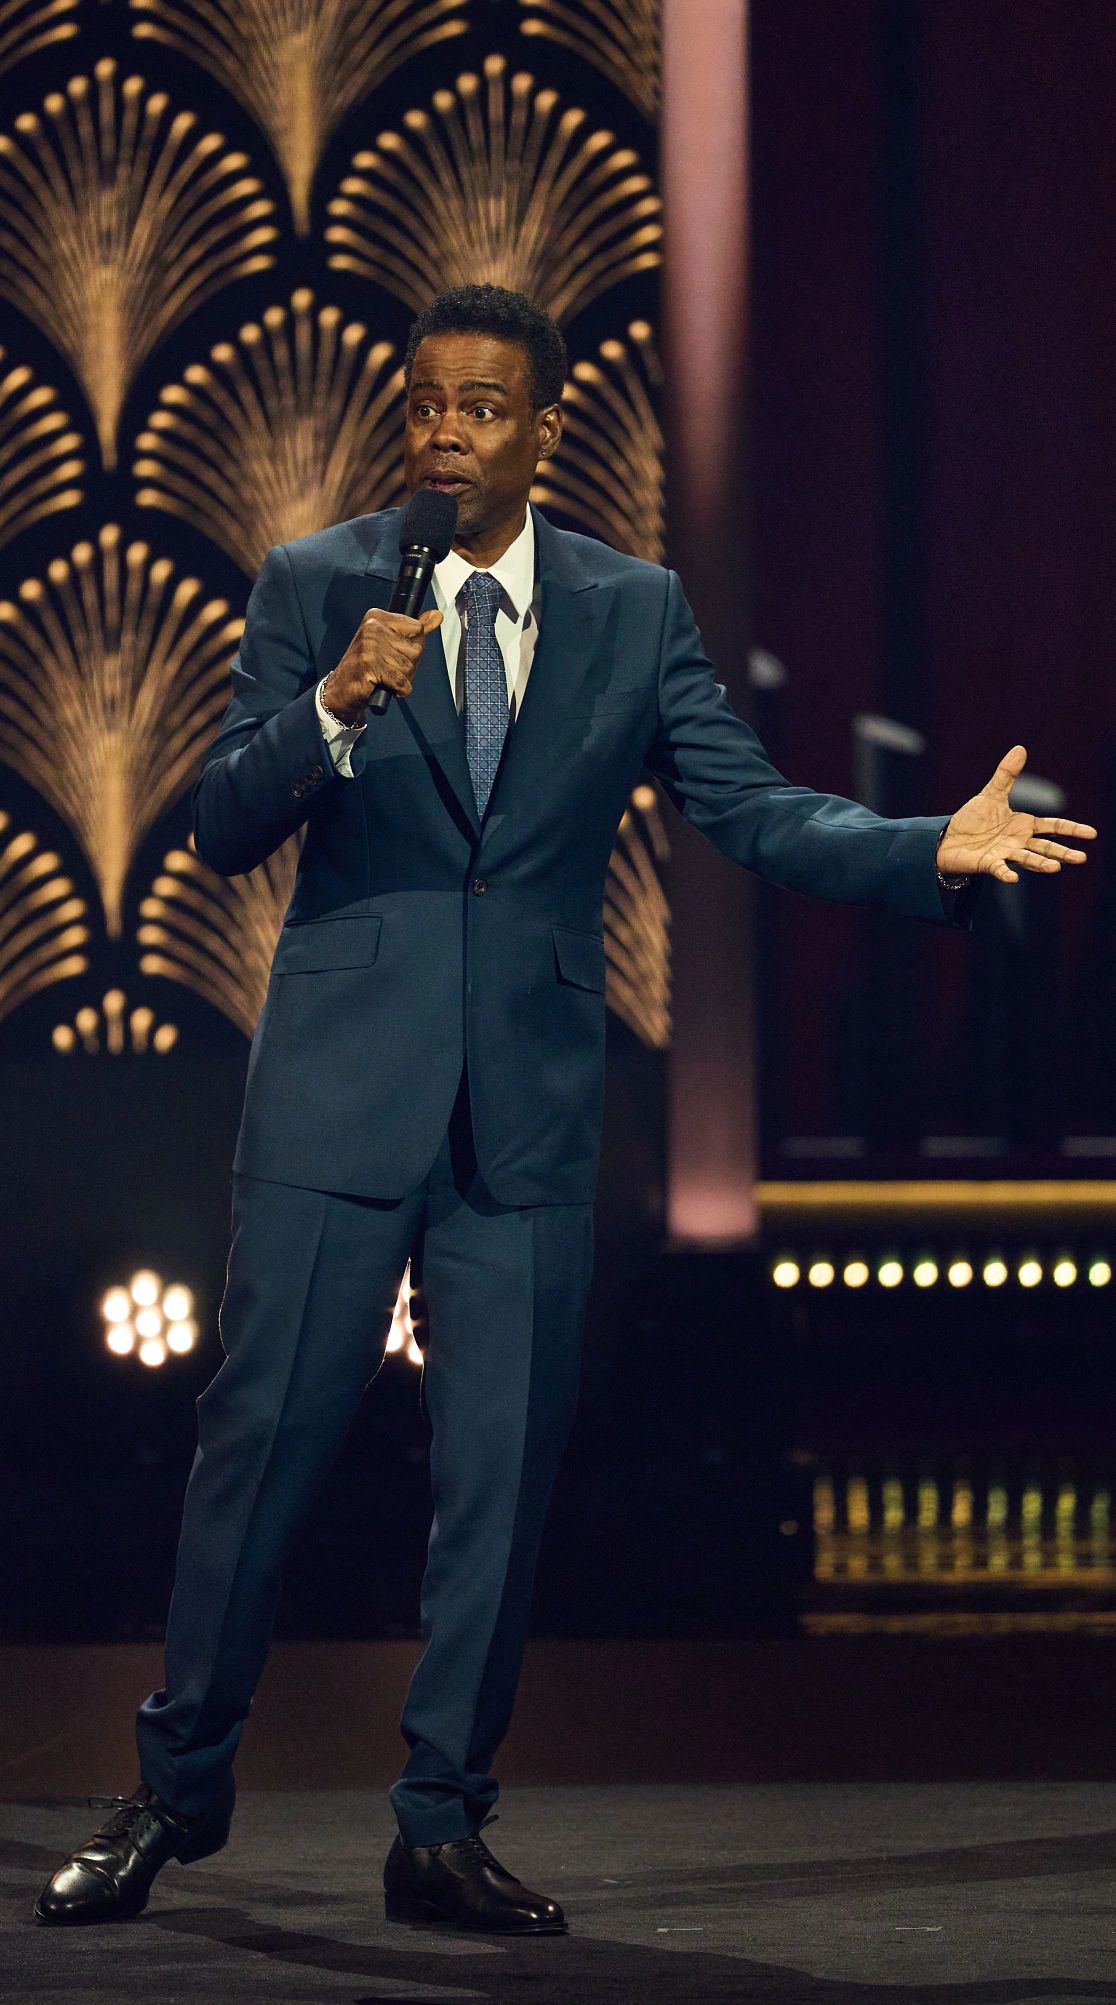 Chris Rock talking into a microphone onstage at the 25th Annual Mark Twain Prize For American Humor